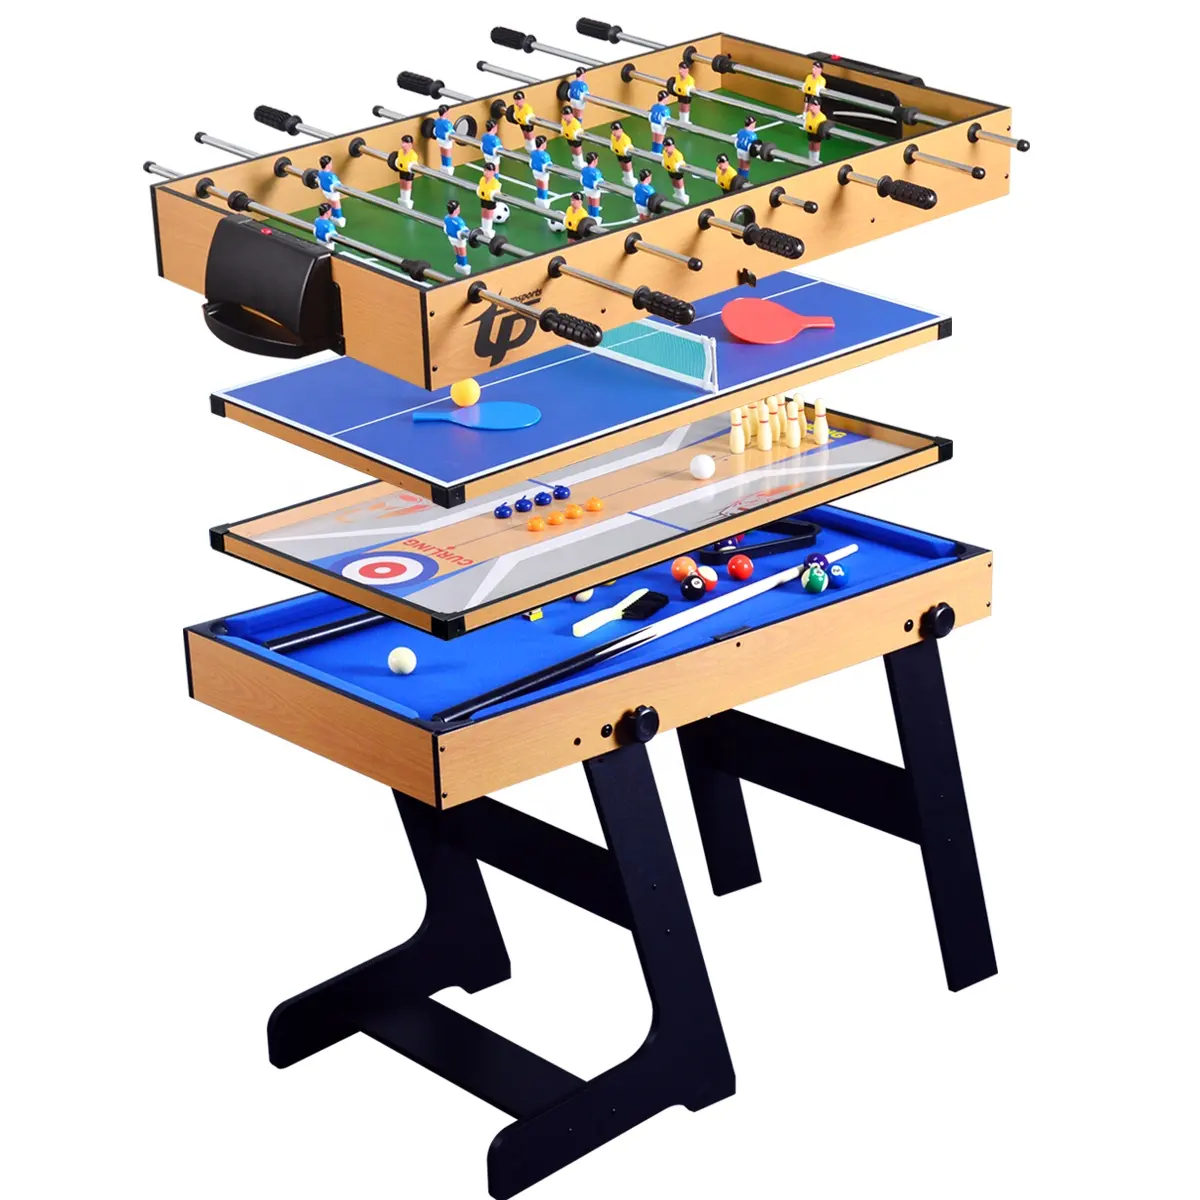 48" 5in1 standing up multi game table billiards/soccer/shuffleboard/bowling/tennis table with all full accessoriesTM-4817